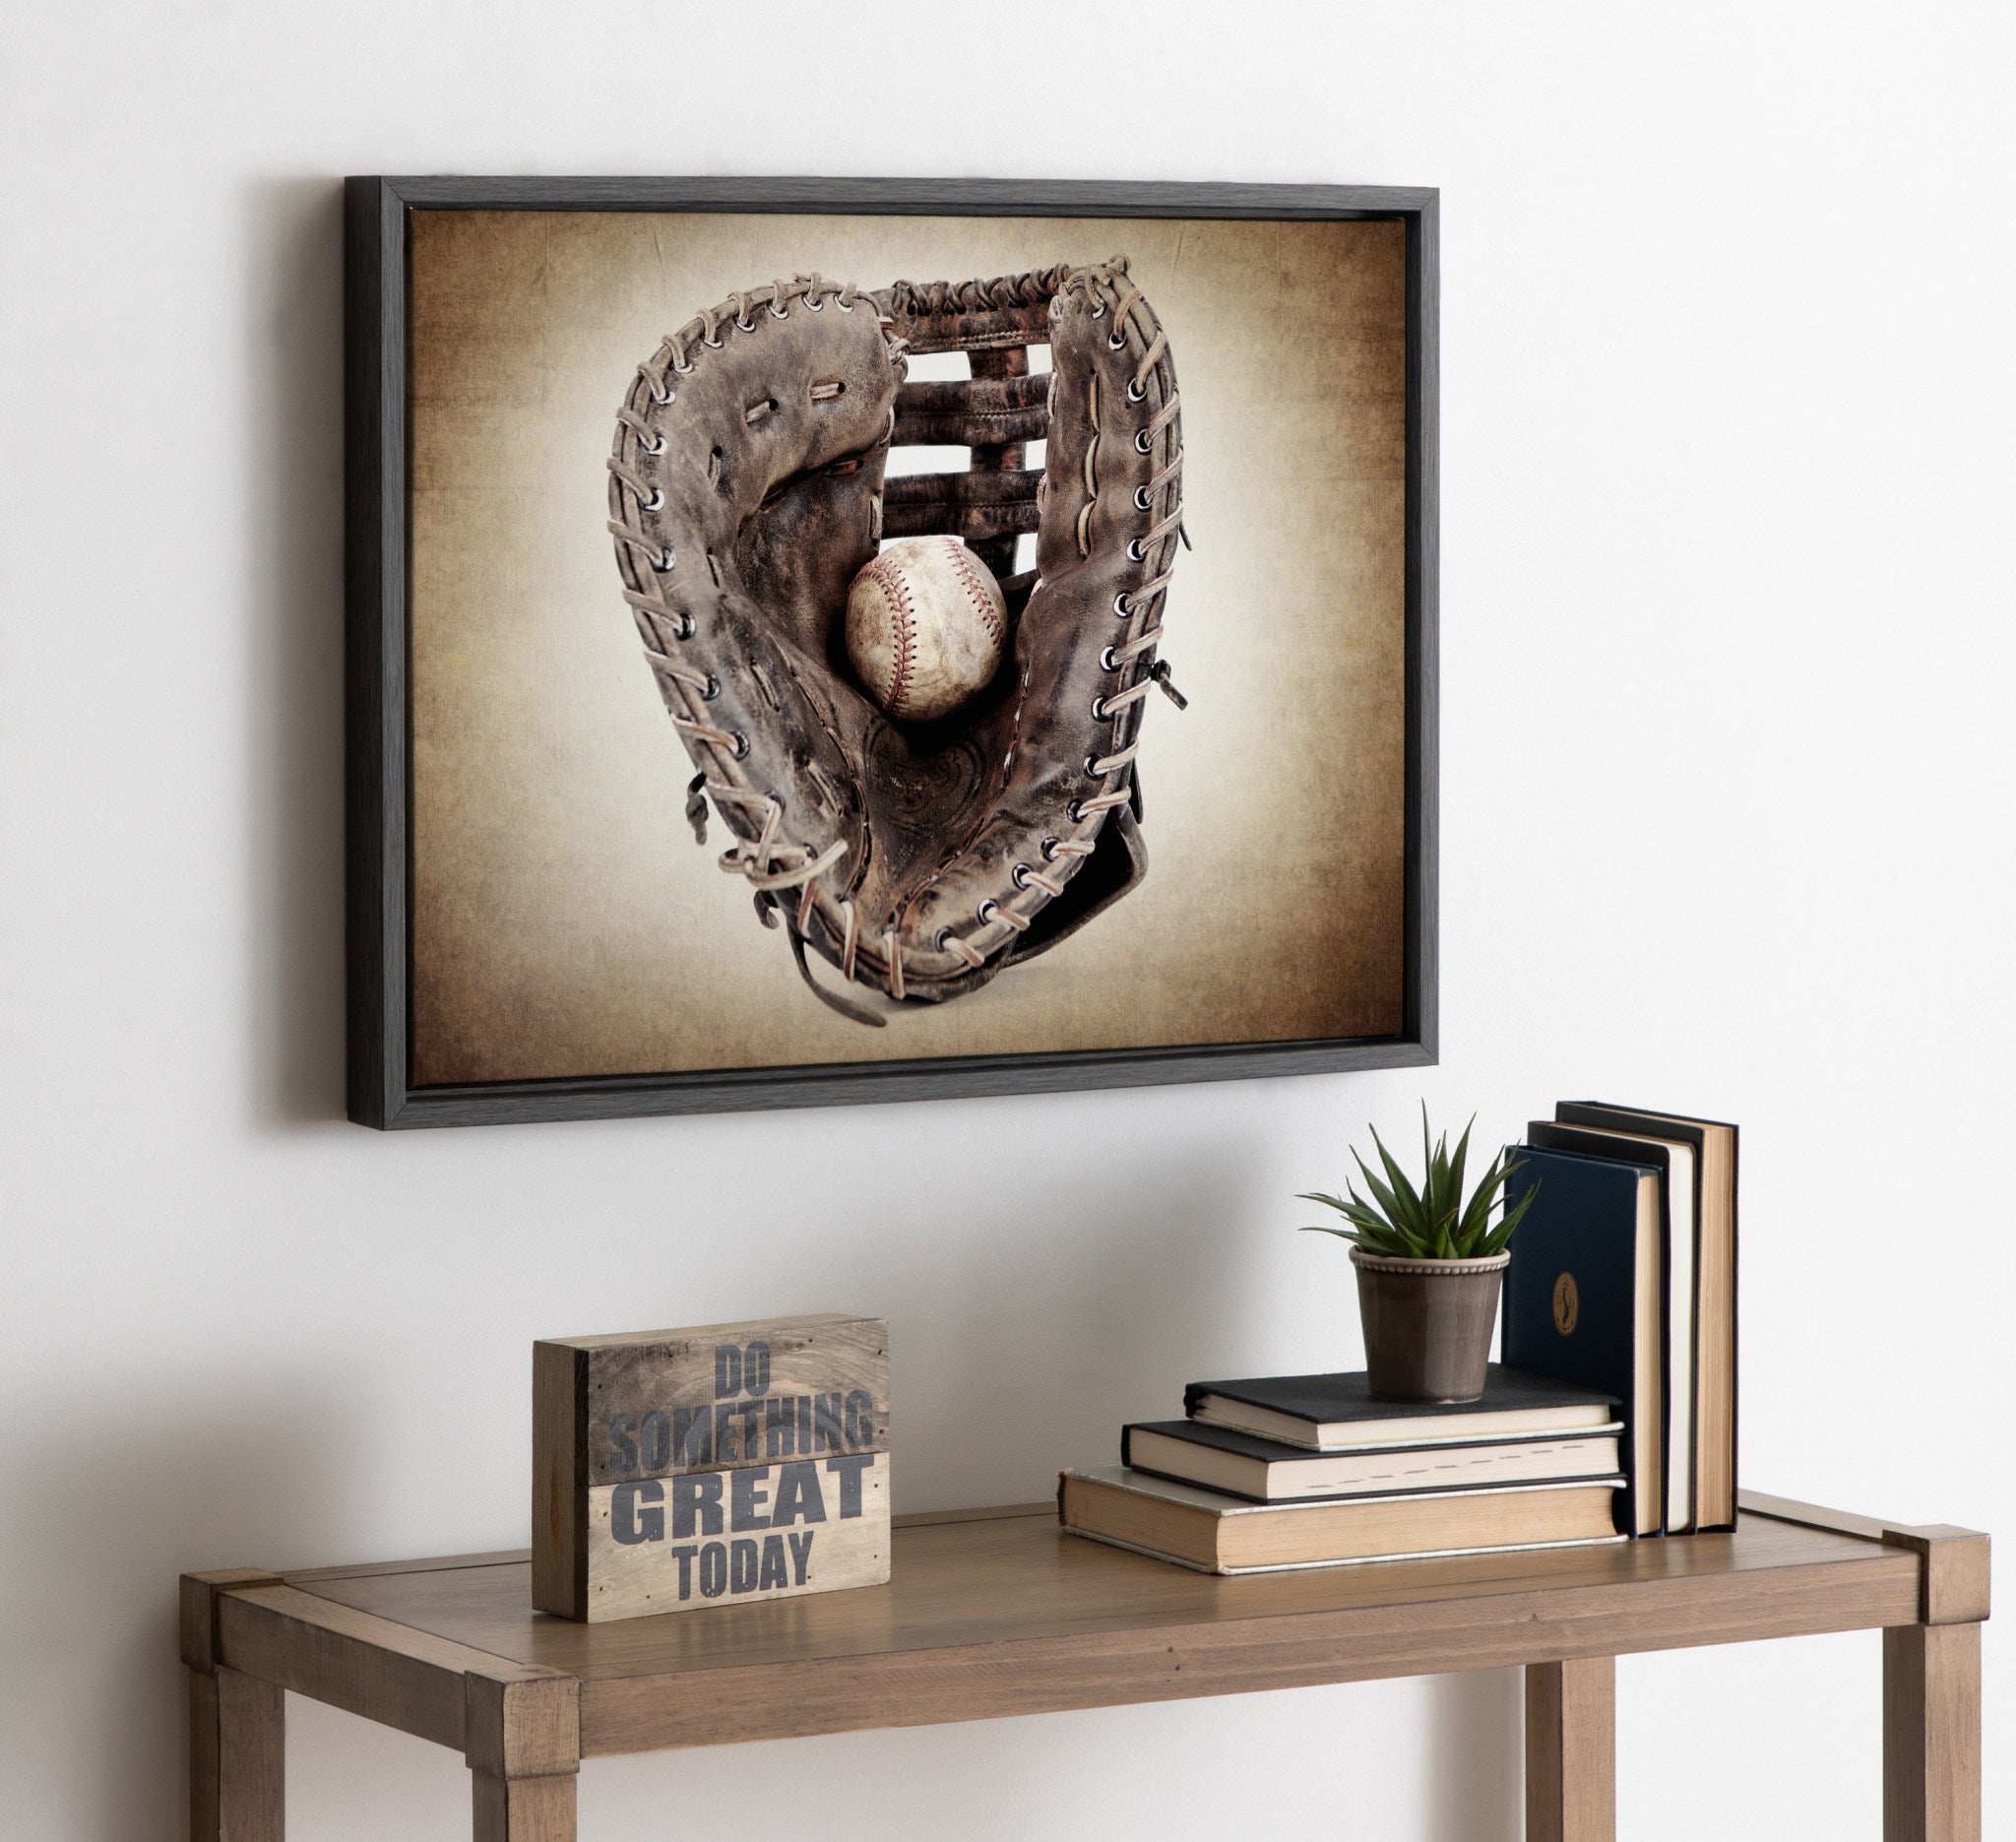 Sylvie Vintage Baseball Glove Framed Canvas By Shawn St. Peter